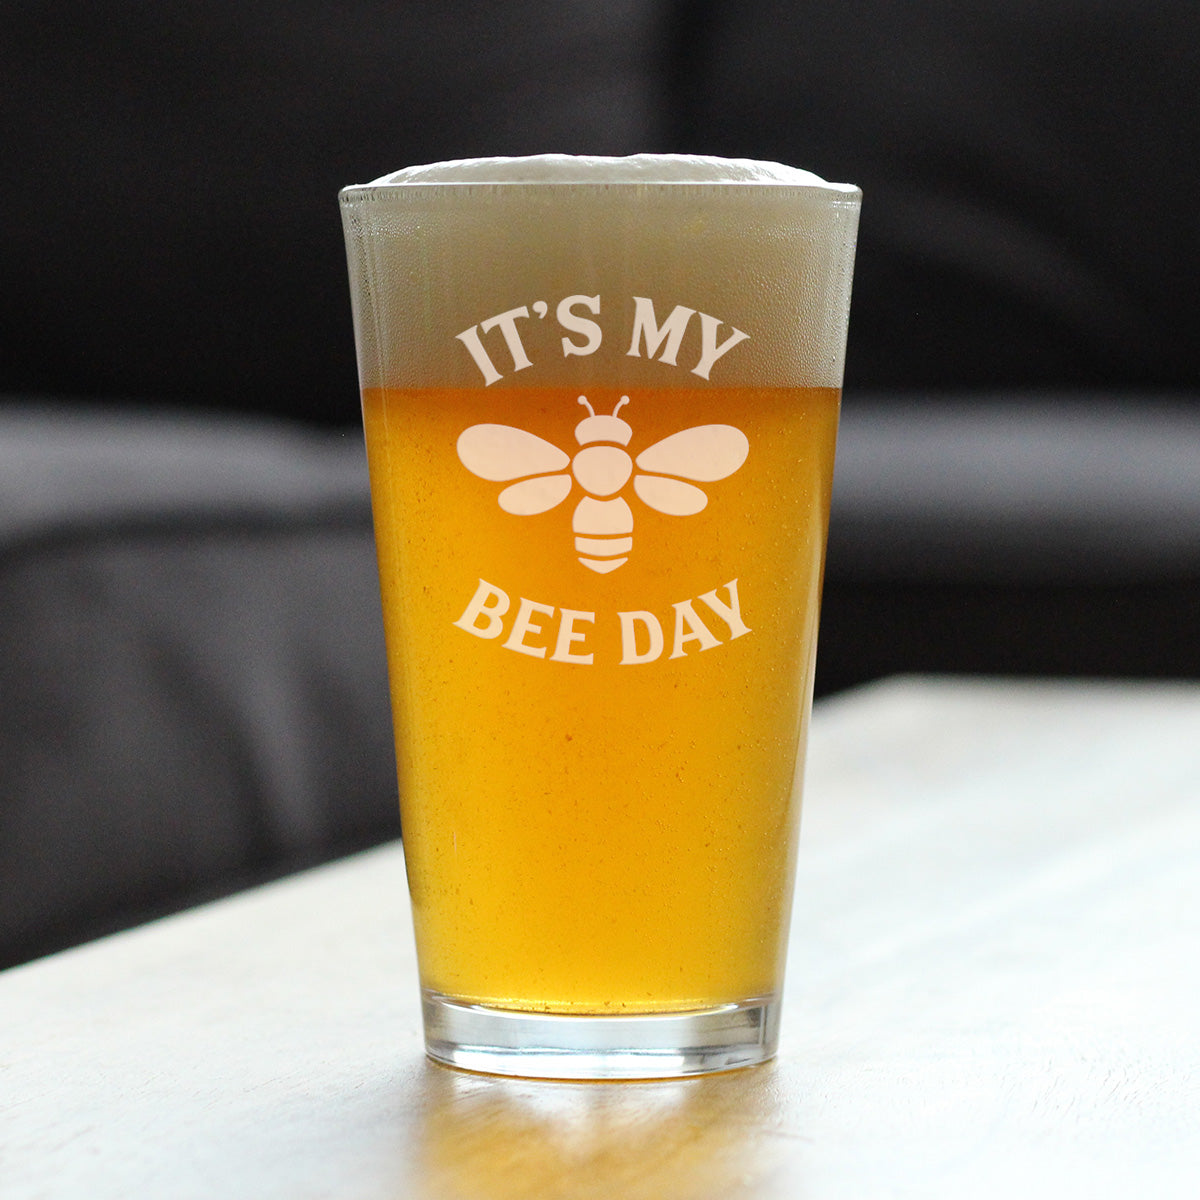 Bee Day - Funny Pint Glass for Beer - Bumblebee Bday Party Decor for Men or Women Getting Older - 16 oz